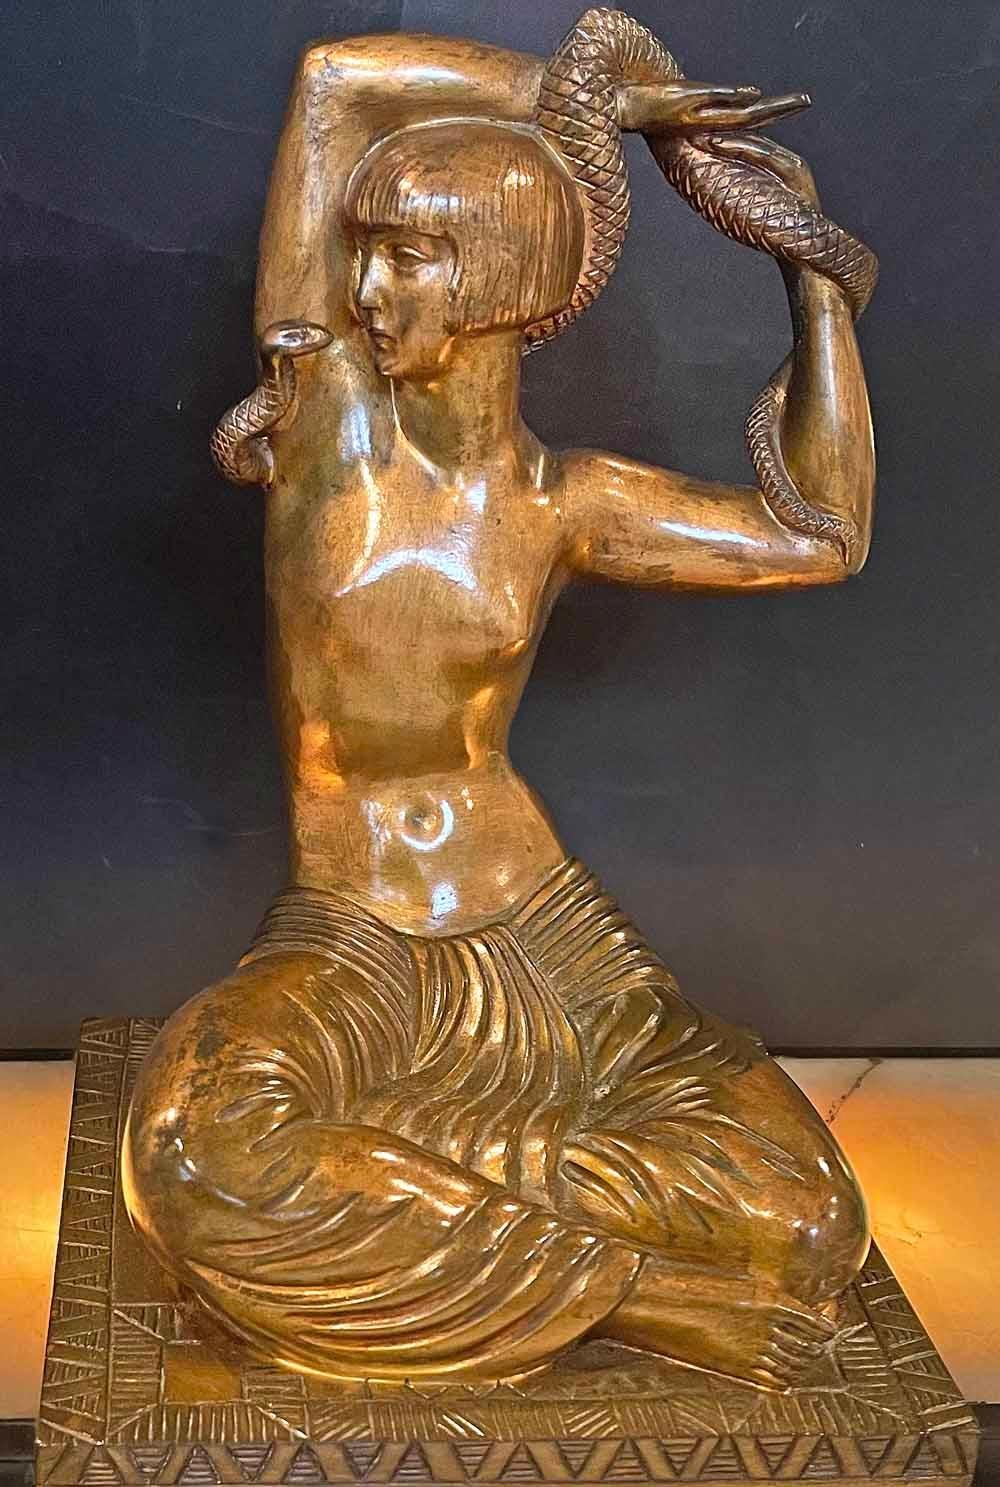 Extremely rare and very finely cast, this gilded bronze sculpture of a snake dancer in harem clothes -- but with a modern 1920s hair style -- was sculpted by Raymond Delamarre at the height of the Art Deco period in the 1920s. The nude female figure